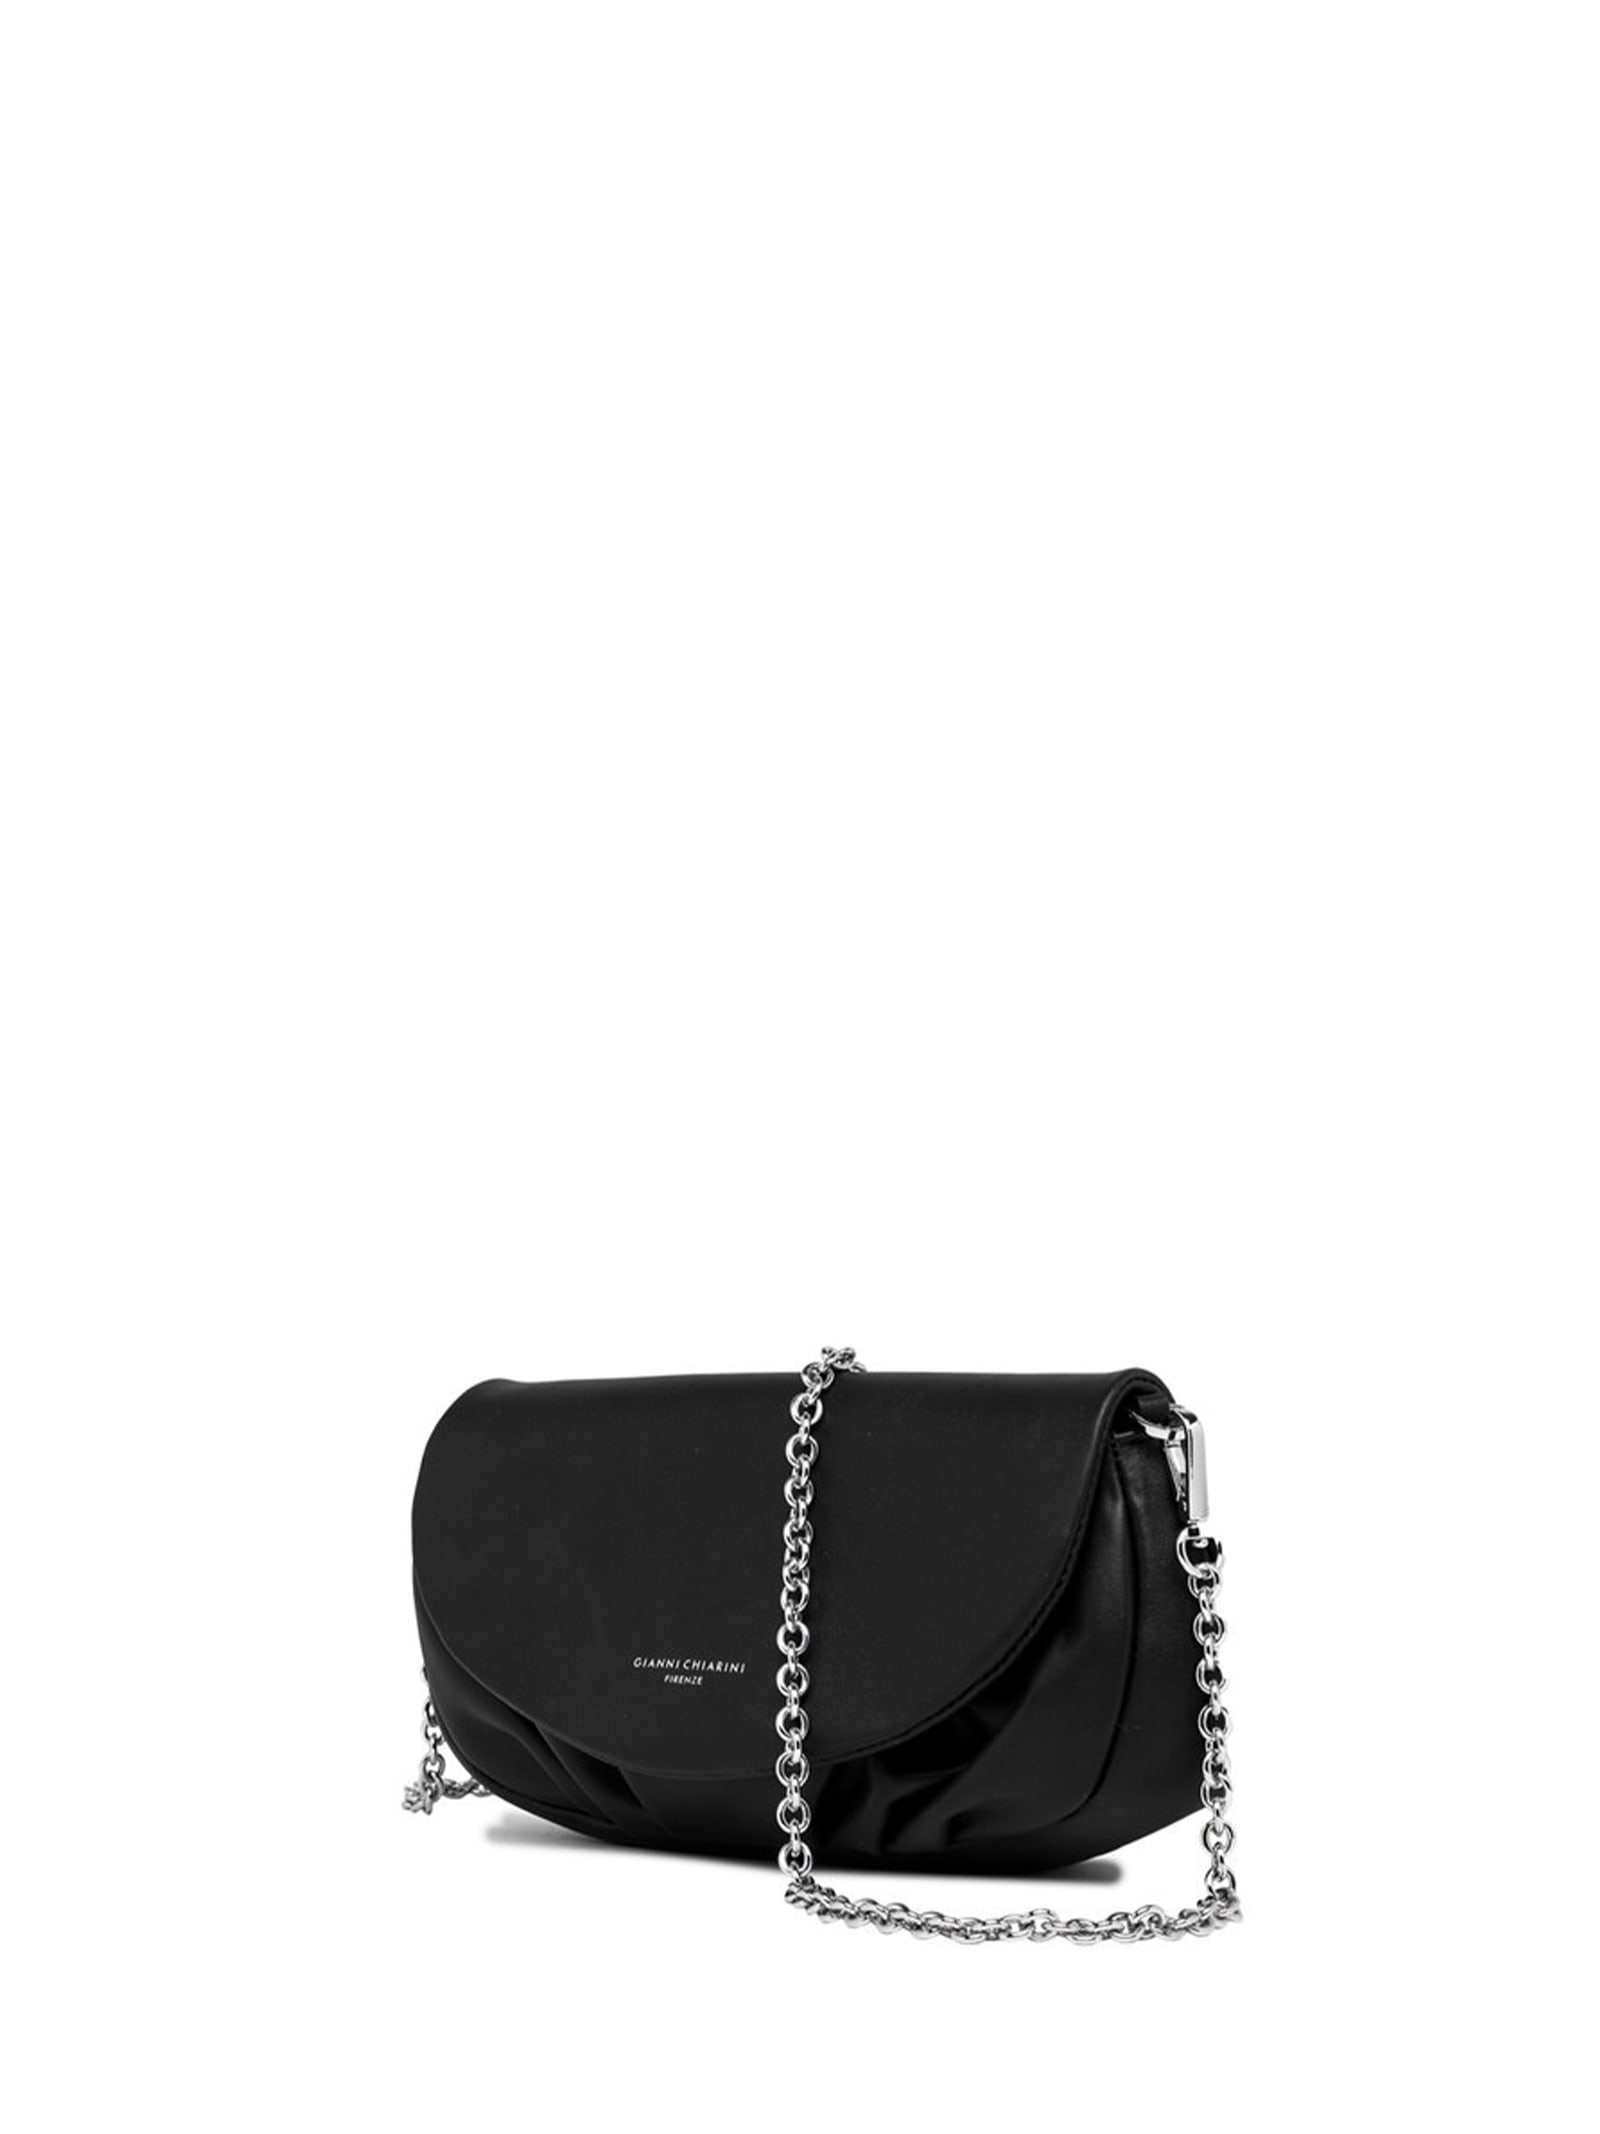 Shop Gianni Chiarini Adele Leather Clutch Bag With Shoulder Strap In Nero